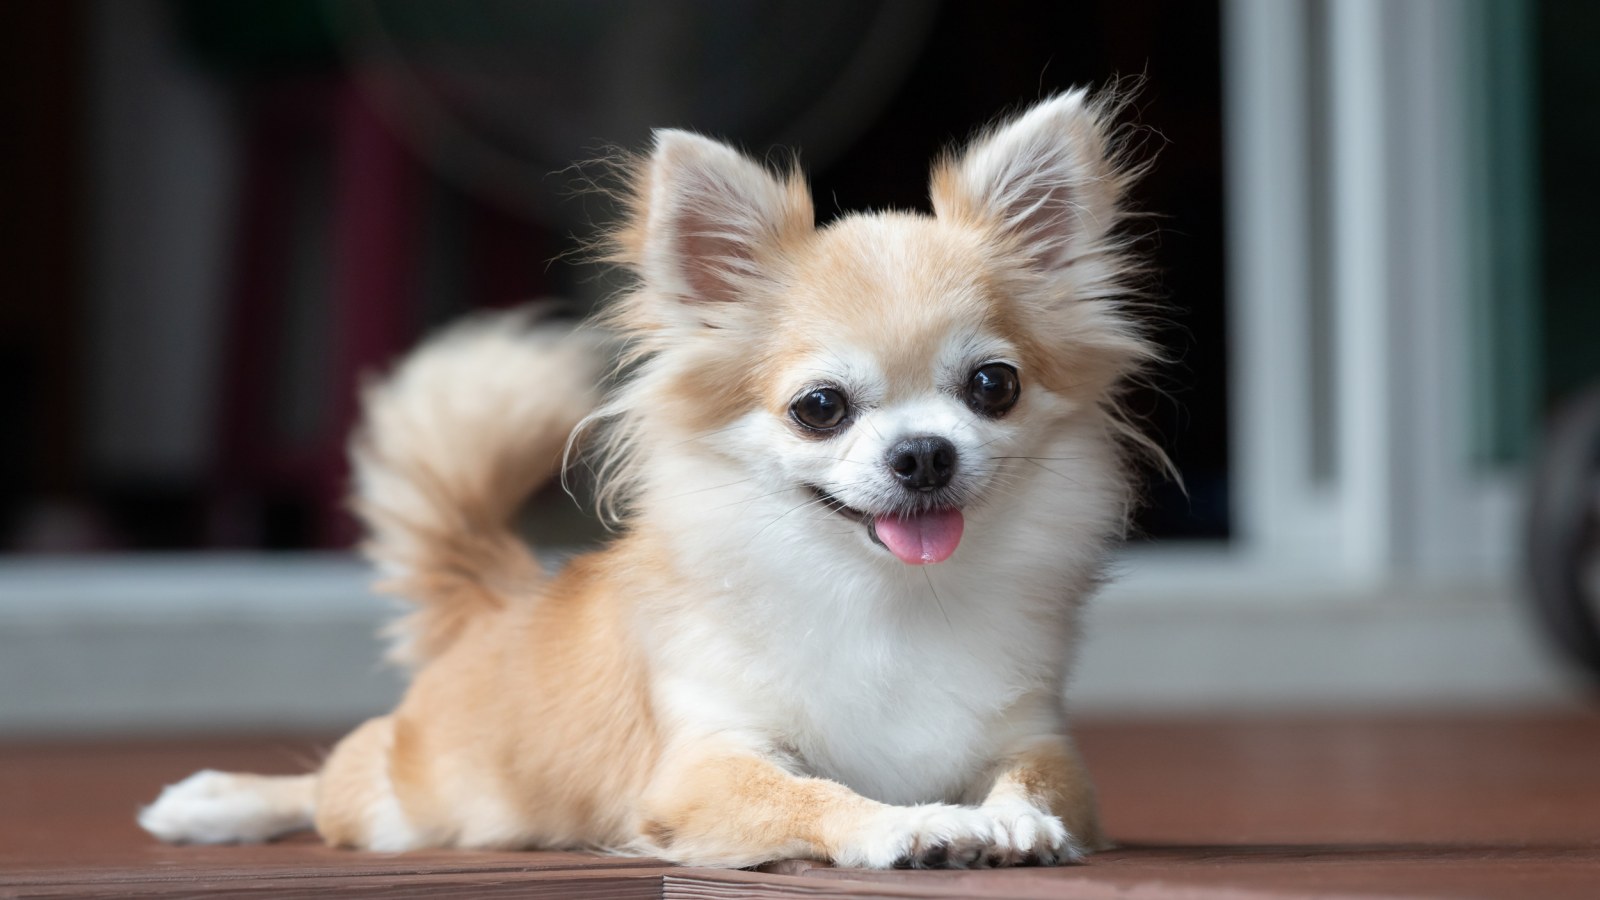 Chihuahua's Cute Behavior Wins Over Man Who 'Wasn't a Dog Person'